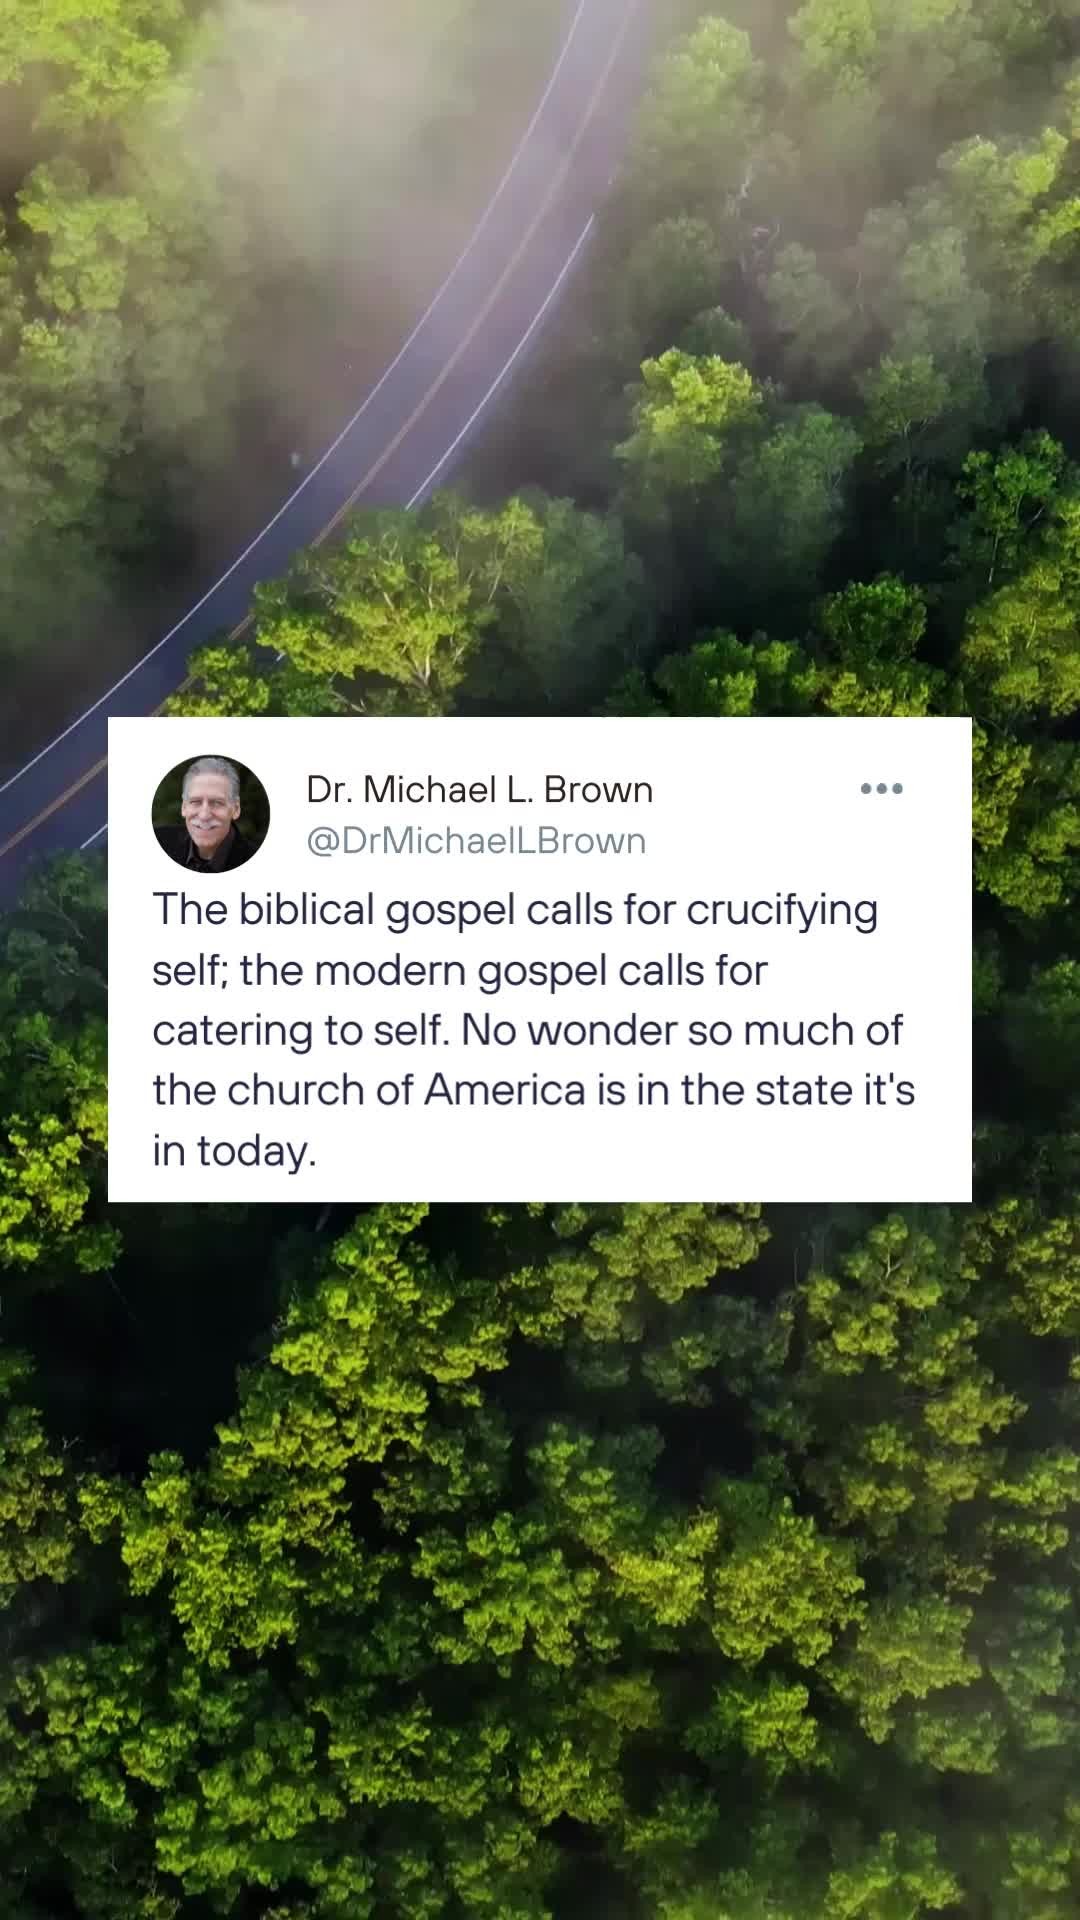 The biblical gospel calls for crucifying self; the modern gospel calls for catering to self. No wonder so much of the church of America is in the state it's in today.#askdrbrown #drbrownquotes #famousquotes #quotestoinspire  #Godswork #twitter #politics #views #quotestoinspire  #dailywisdom #faithhopelove